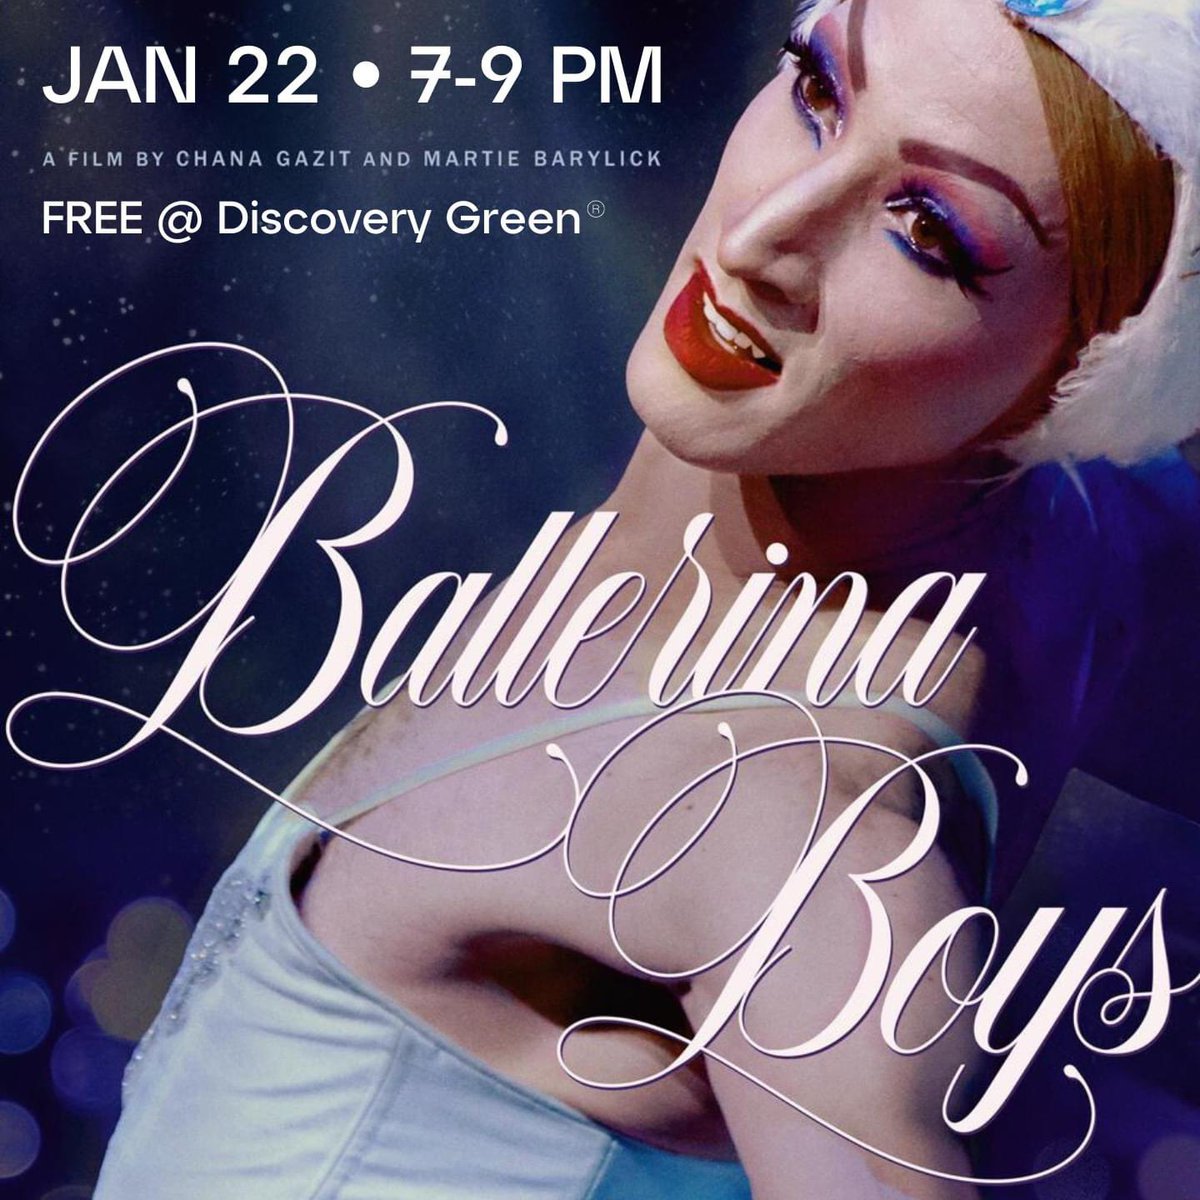 Don’t miss Ballerina Boys, a film full of beauty and fun, it seduces viewers into facing issues of gender, inclusion, and social justice. Monday, January 22, 7-9 on.